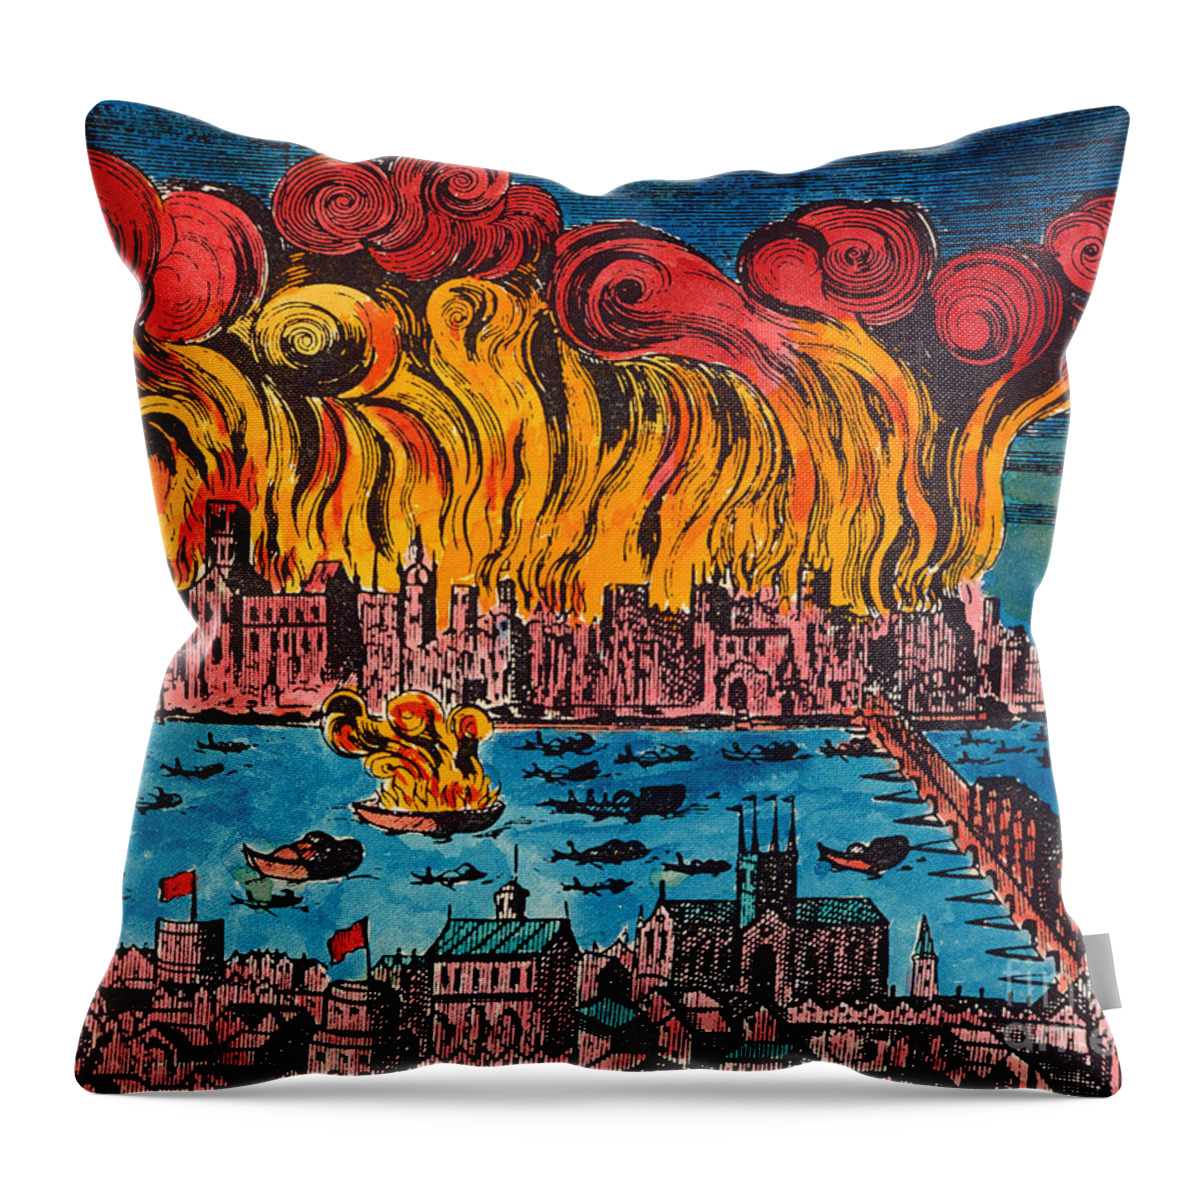 1666 Throw Pillow featuring the photograph Great Fire Of London, 1666 by Granger